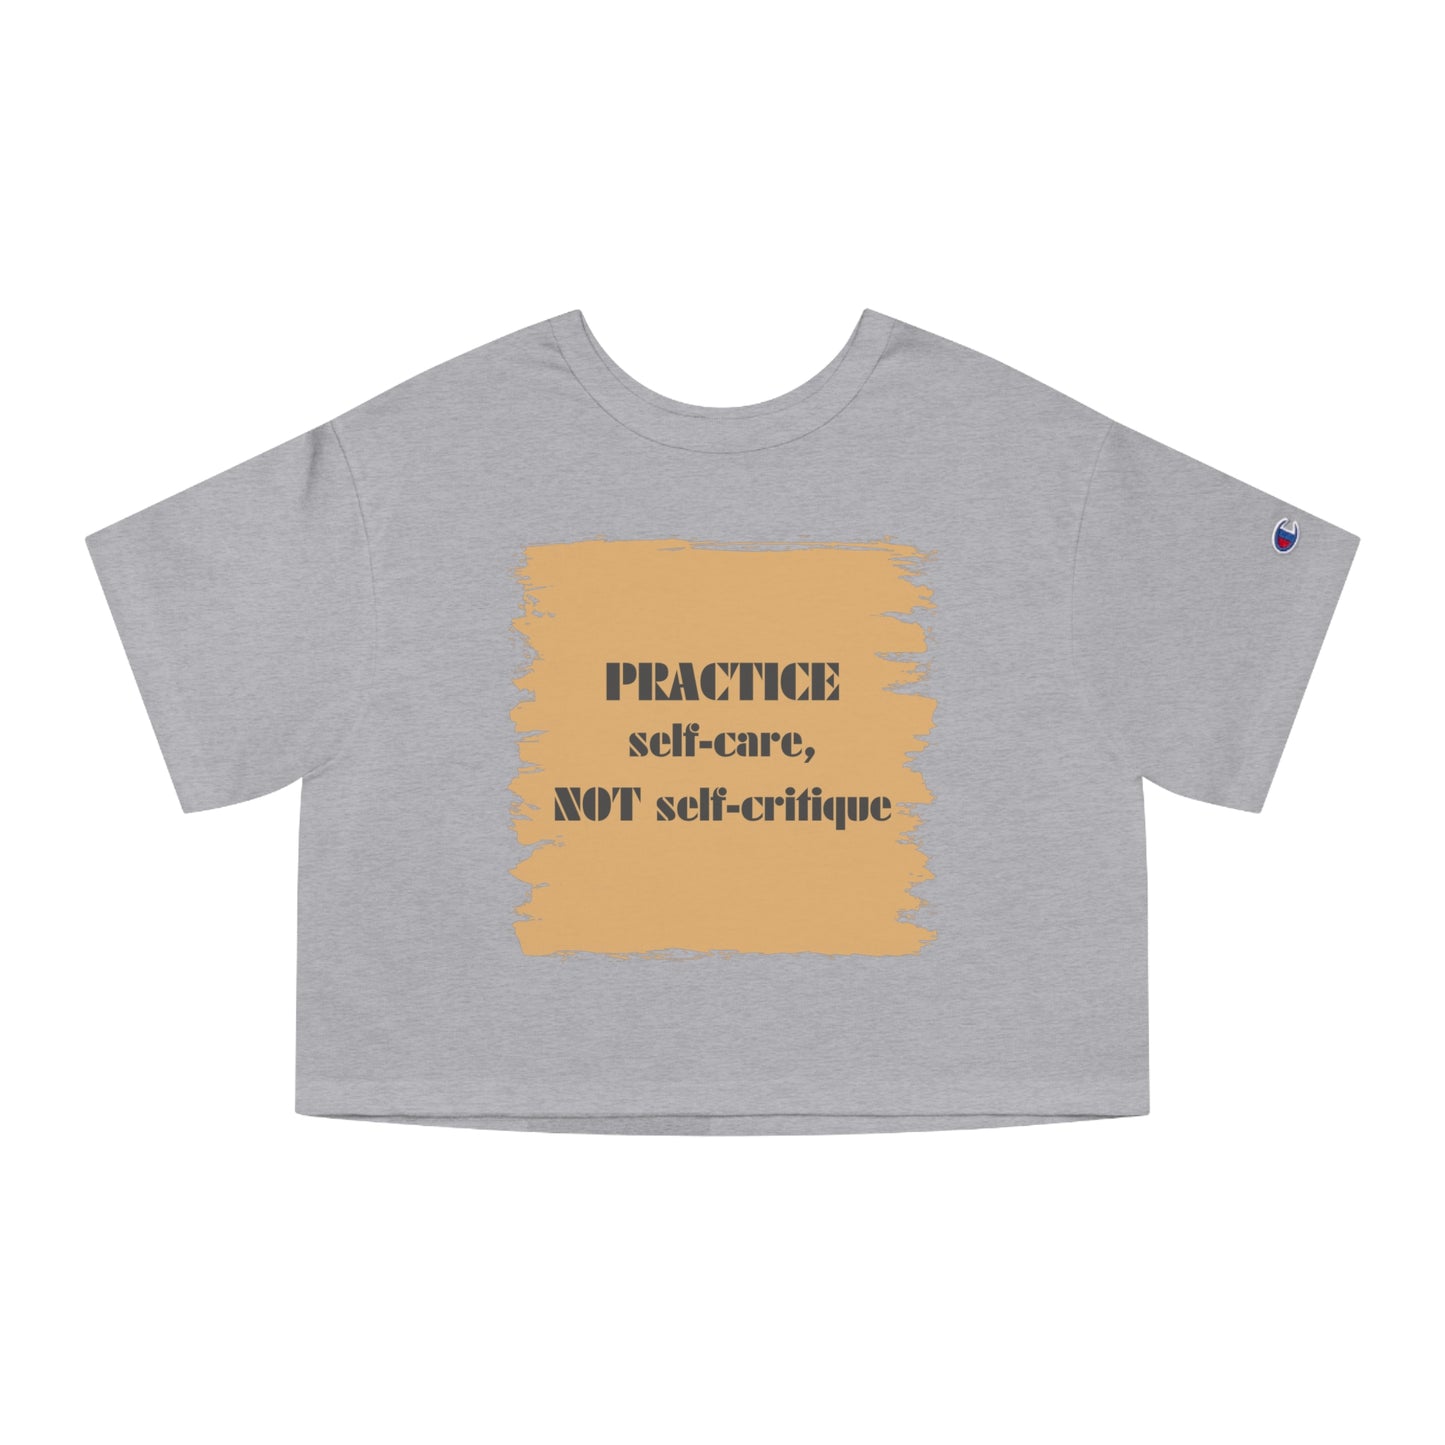 Champion Practice Self-Care, Not Self-Critique Cropped T-Shirt